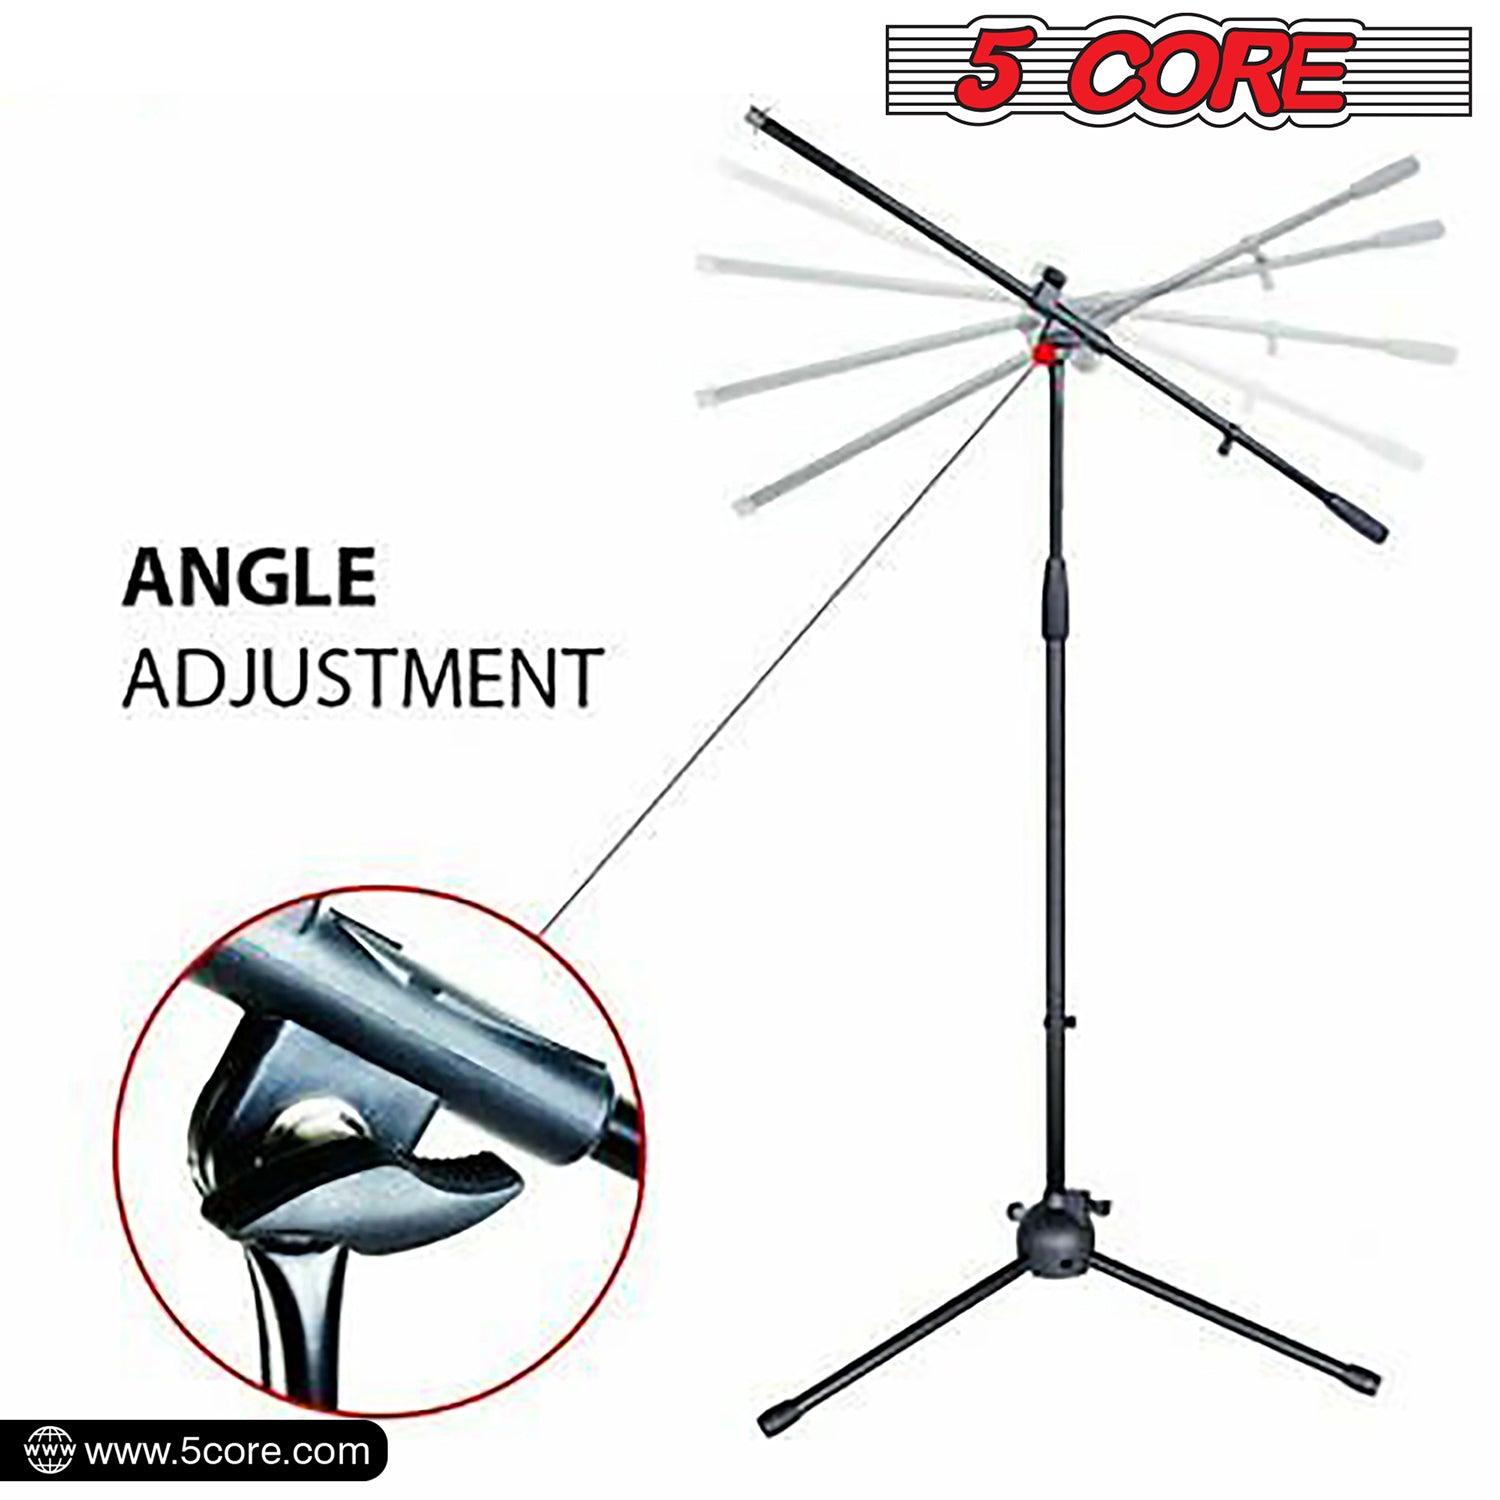 5Core Handheld Dynamic Microphone and Tripod Metal Stand Kit  w Unidirectional Vocal Wired XLR Mic